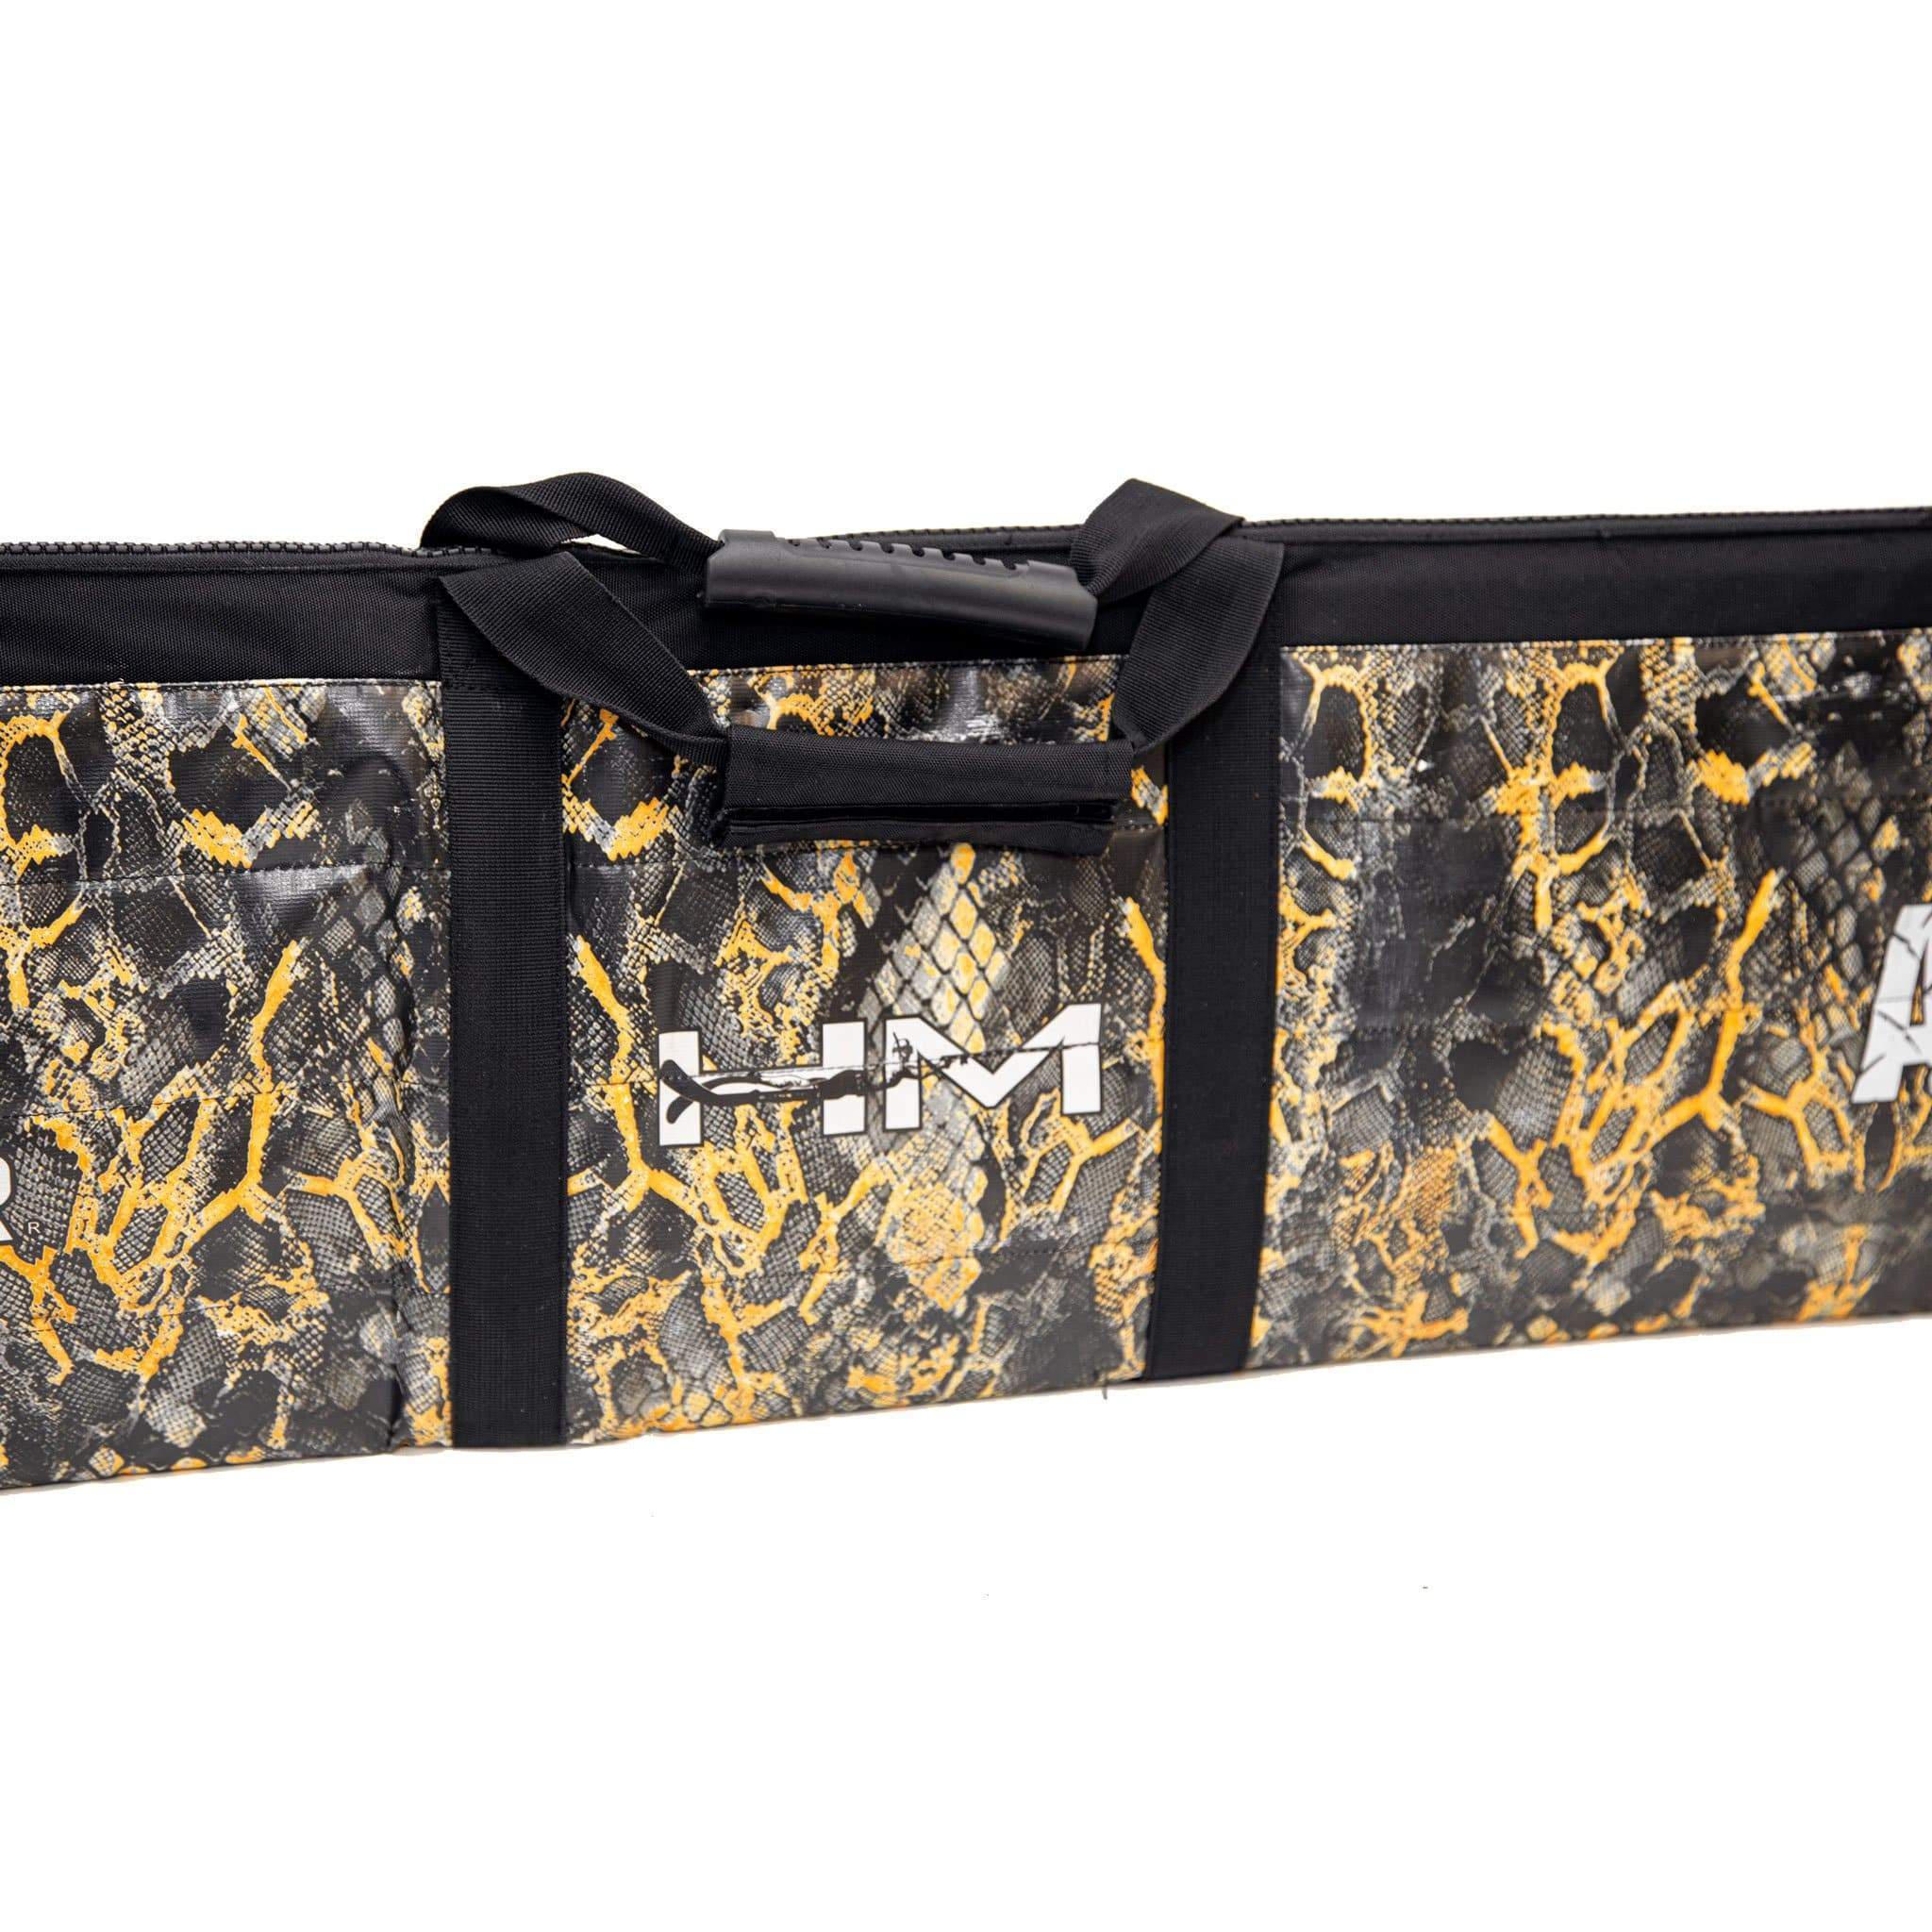 Spearfishing - Bags & Travel Cases - Spear America